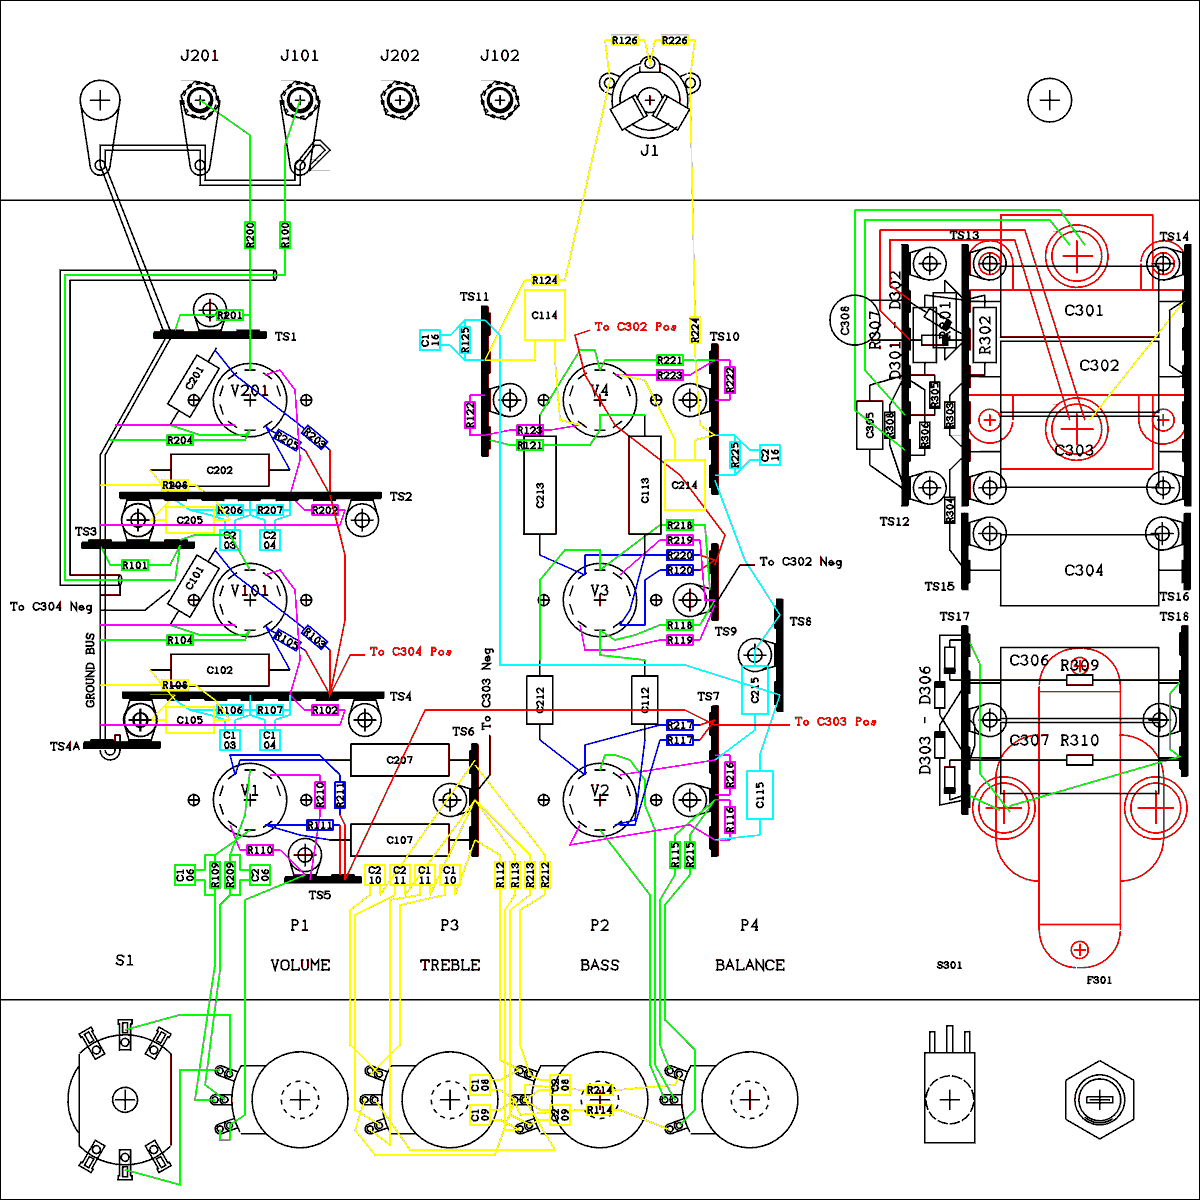  Physical layout of chassis.